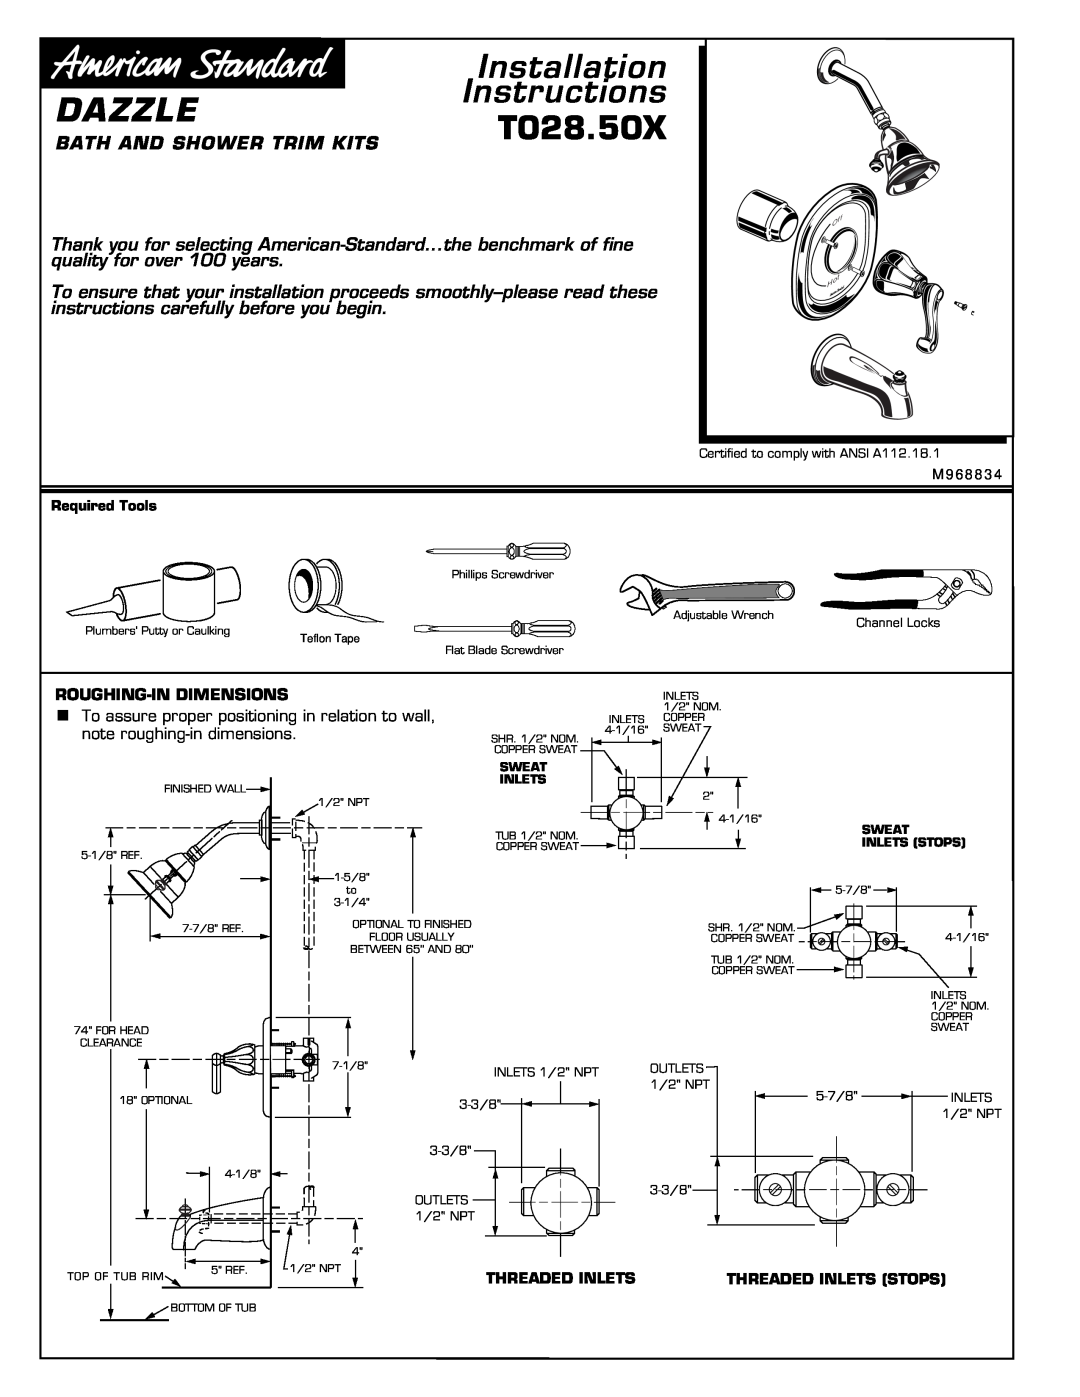 American Standard T028.50X installation instructions Dazzle, Bath And Shower Trim Kits, Installation Instructions 